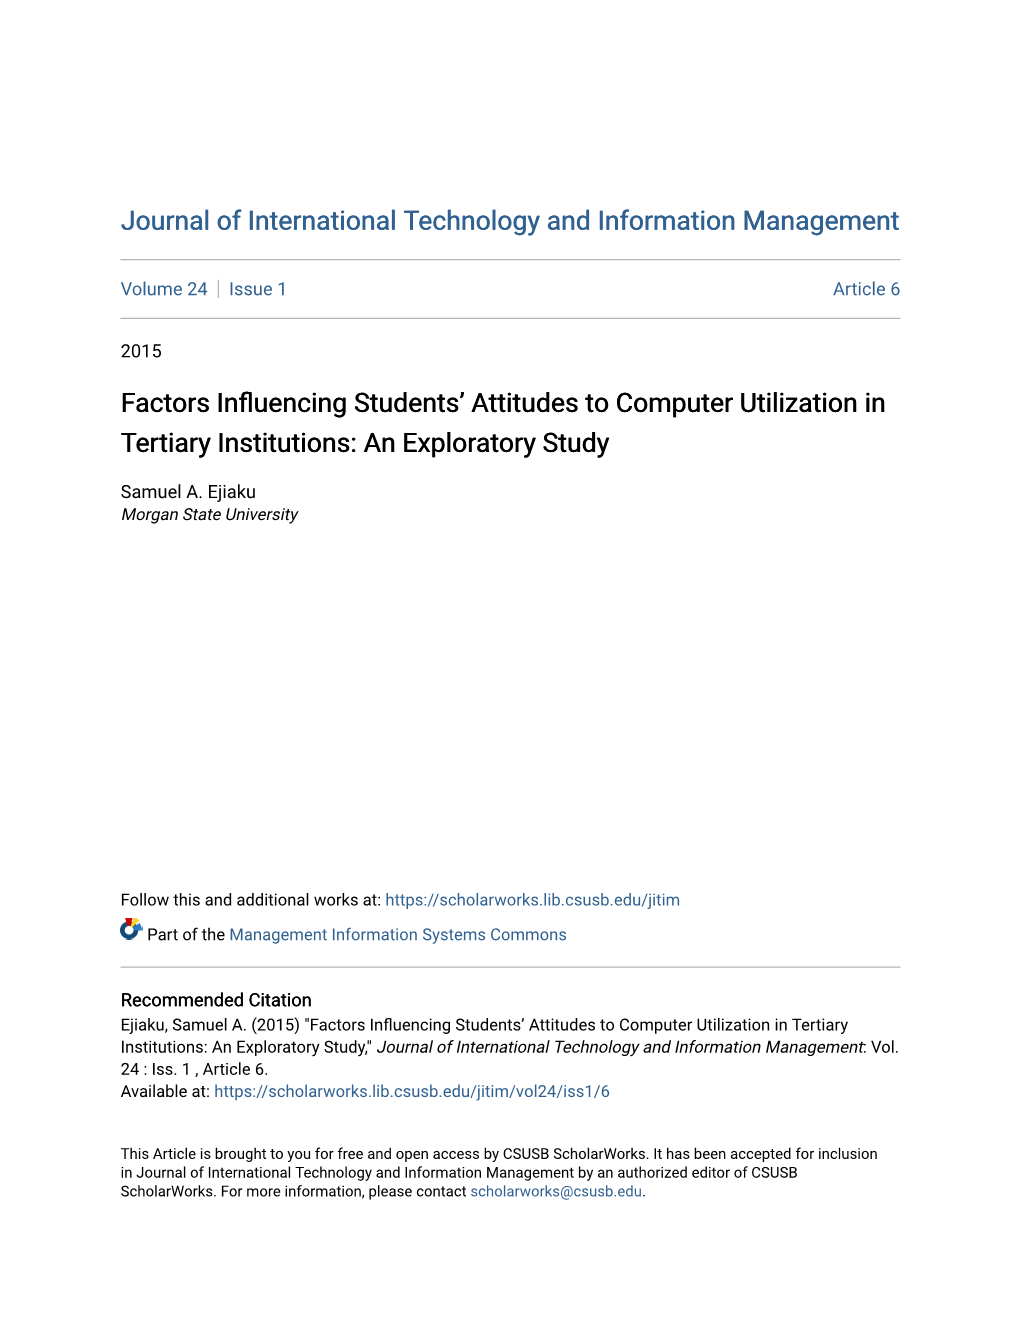 Factors Influencing Students' Attitudes to Computer Utilization in Tertiary